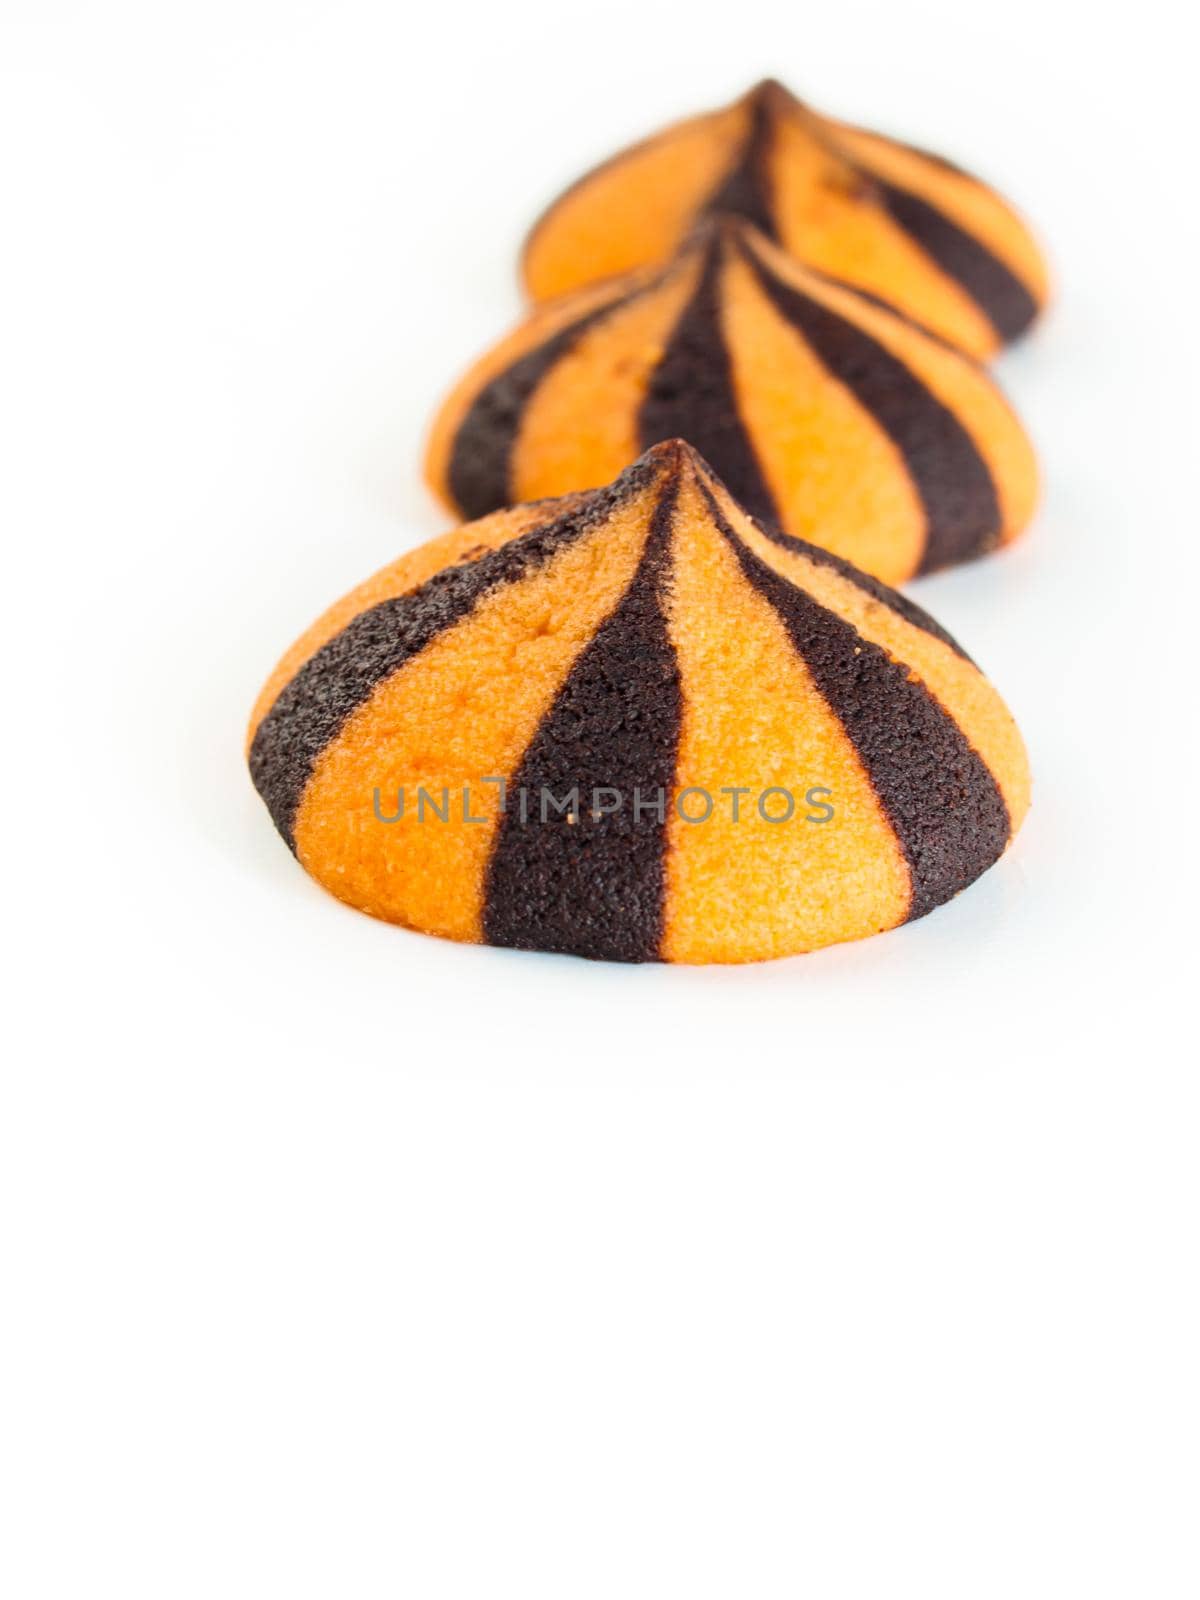 Halloween star drop cookies on white background.